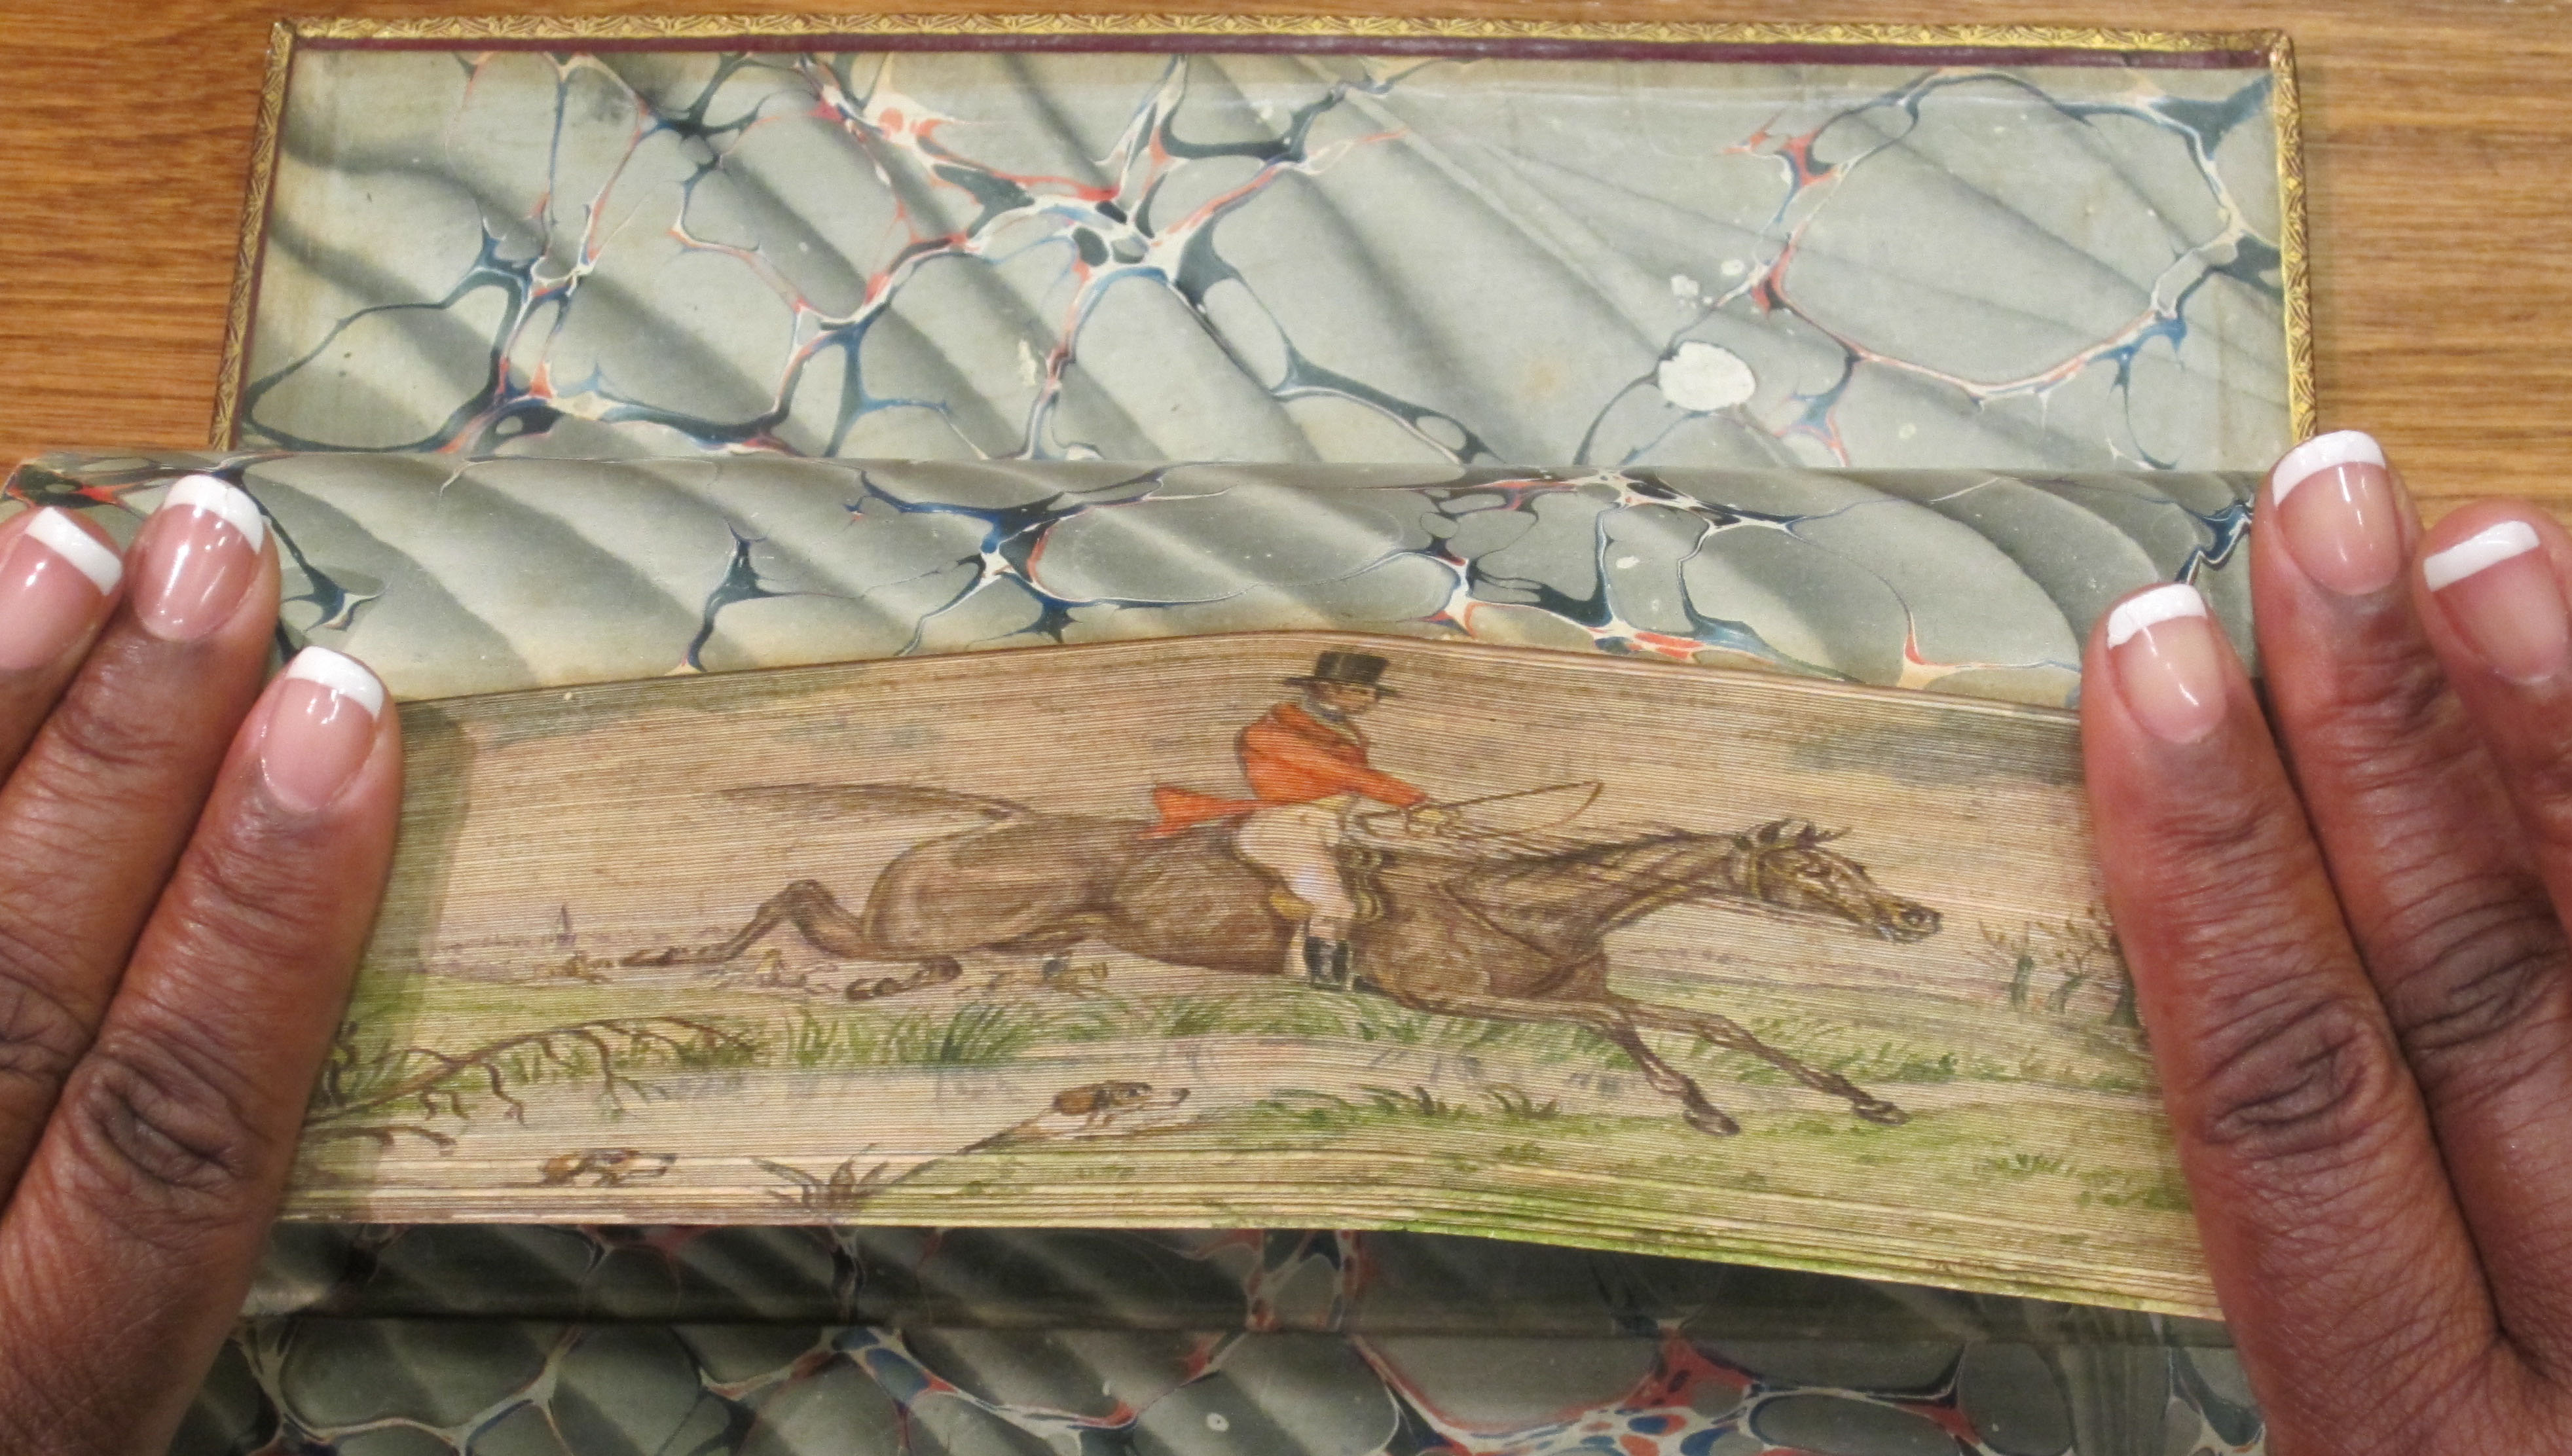 Second fore edge painting, which seen by fanning the text block the opposite way of the first image.